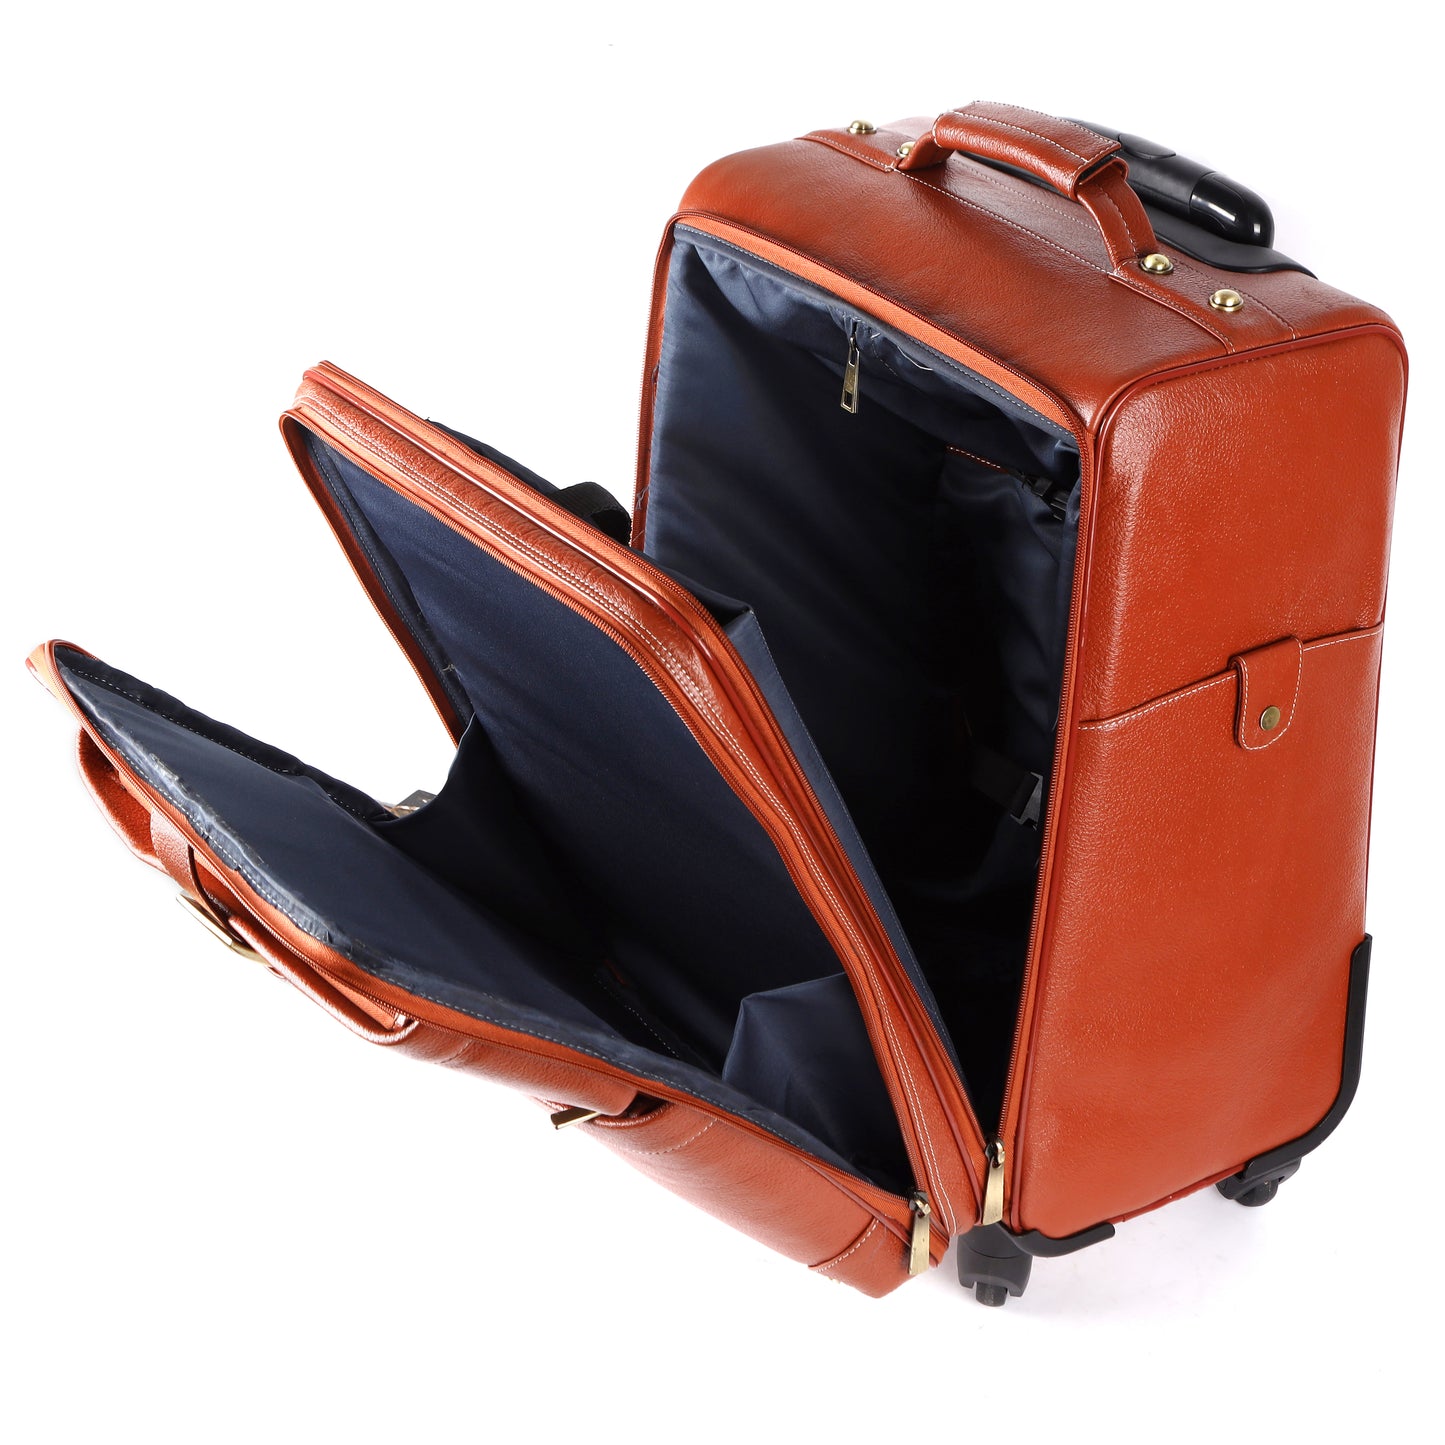 Genuine Leather Trolley Bag Airport Cabin Bag Leather Weekender Leather Luggage with Wheels Gift For Him Tourist Luggage